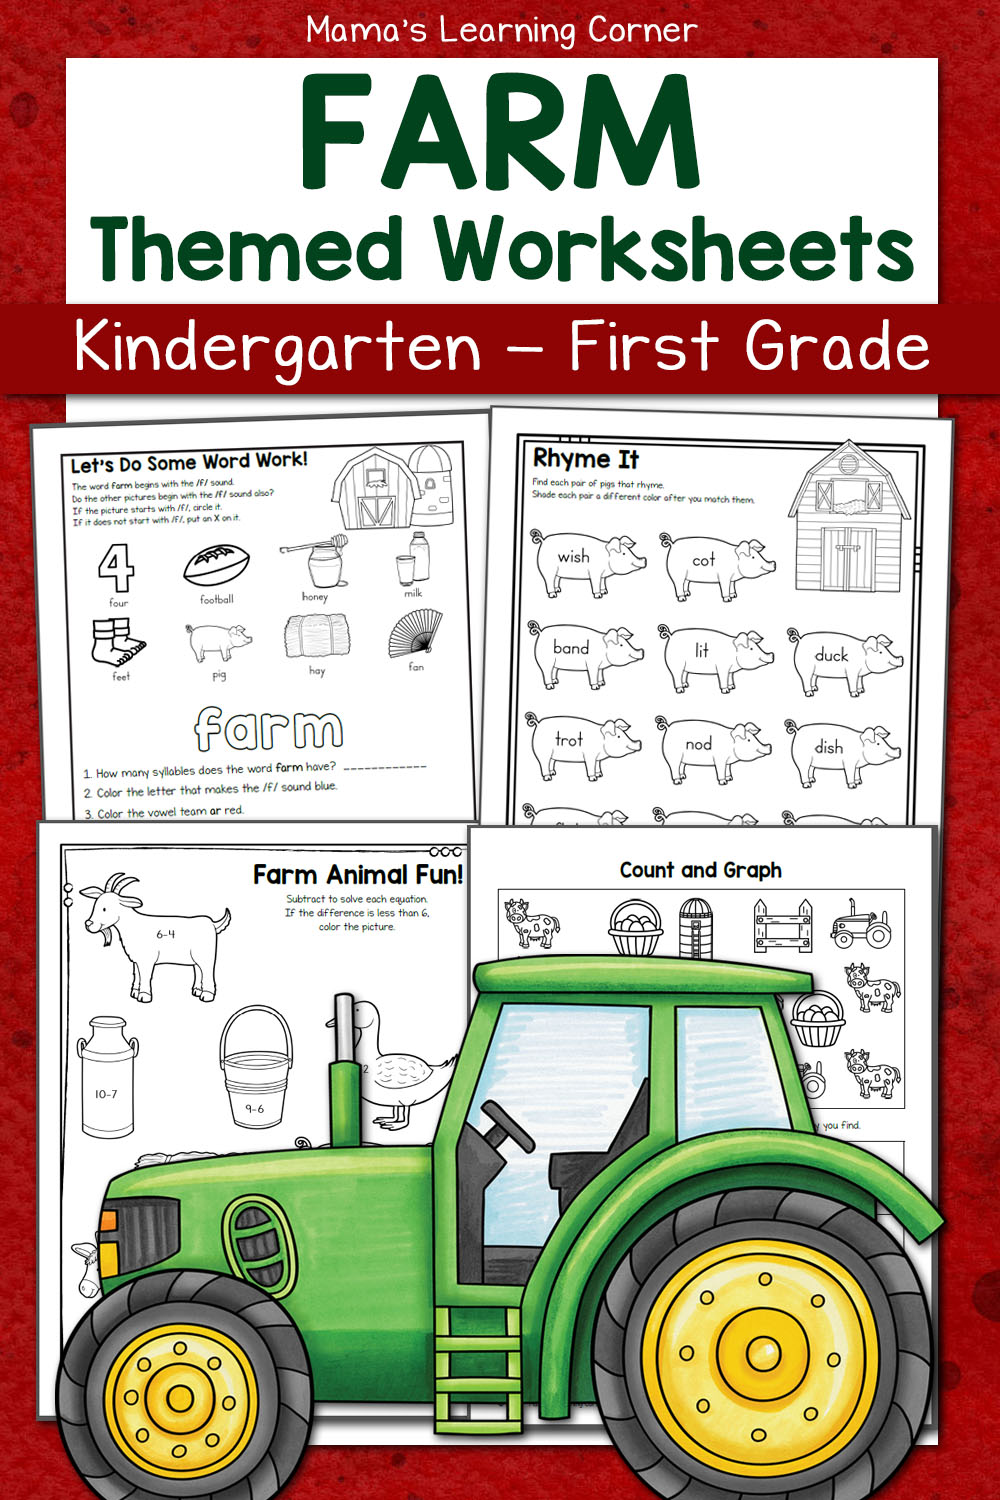 Farm Worksheets for Kindergarten and First Grade - Mamas Learning Corner